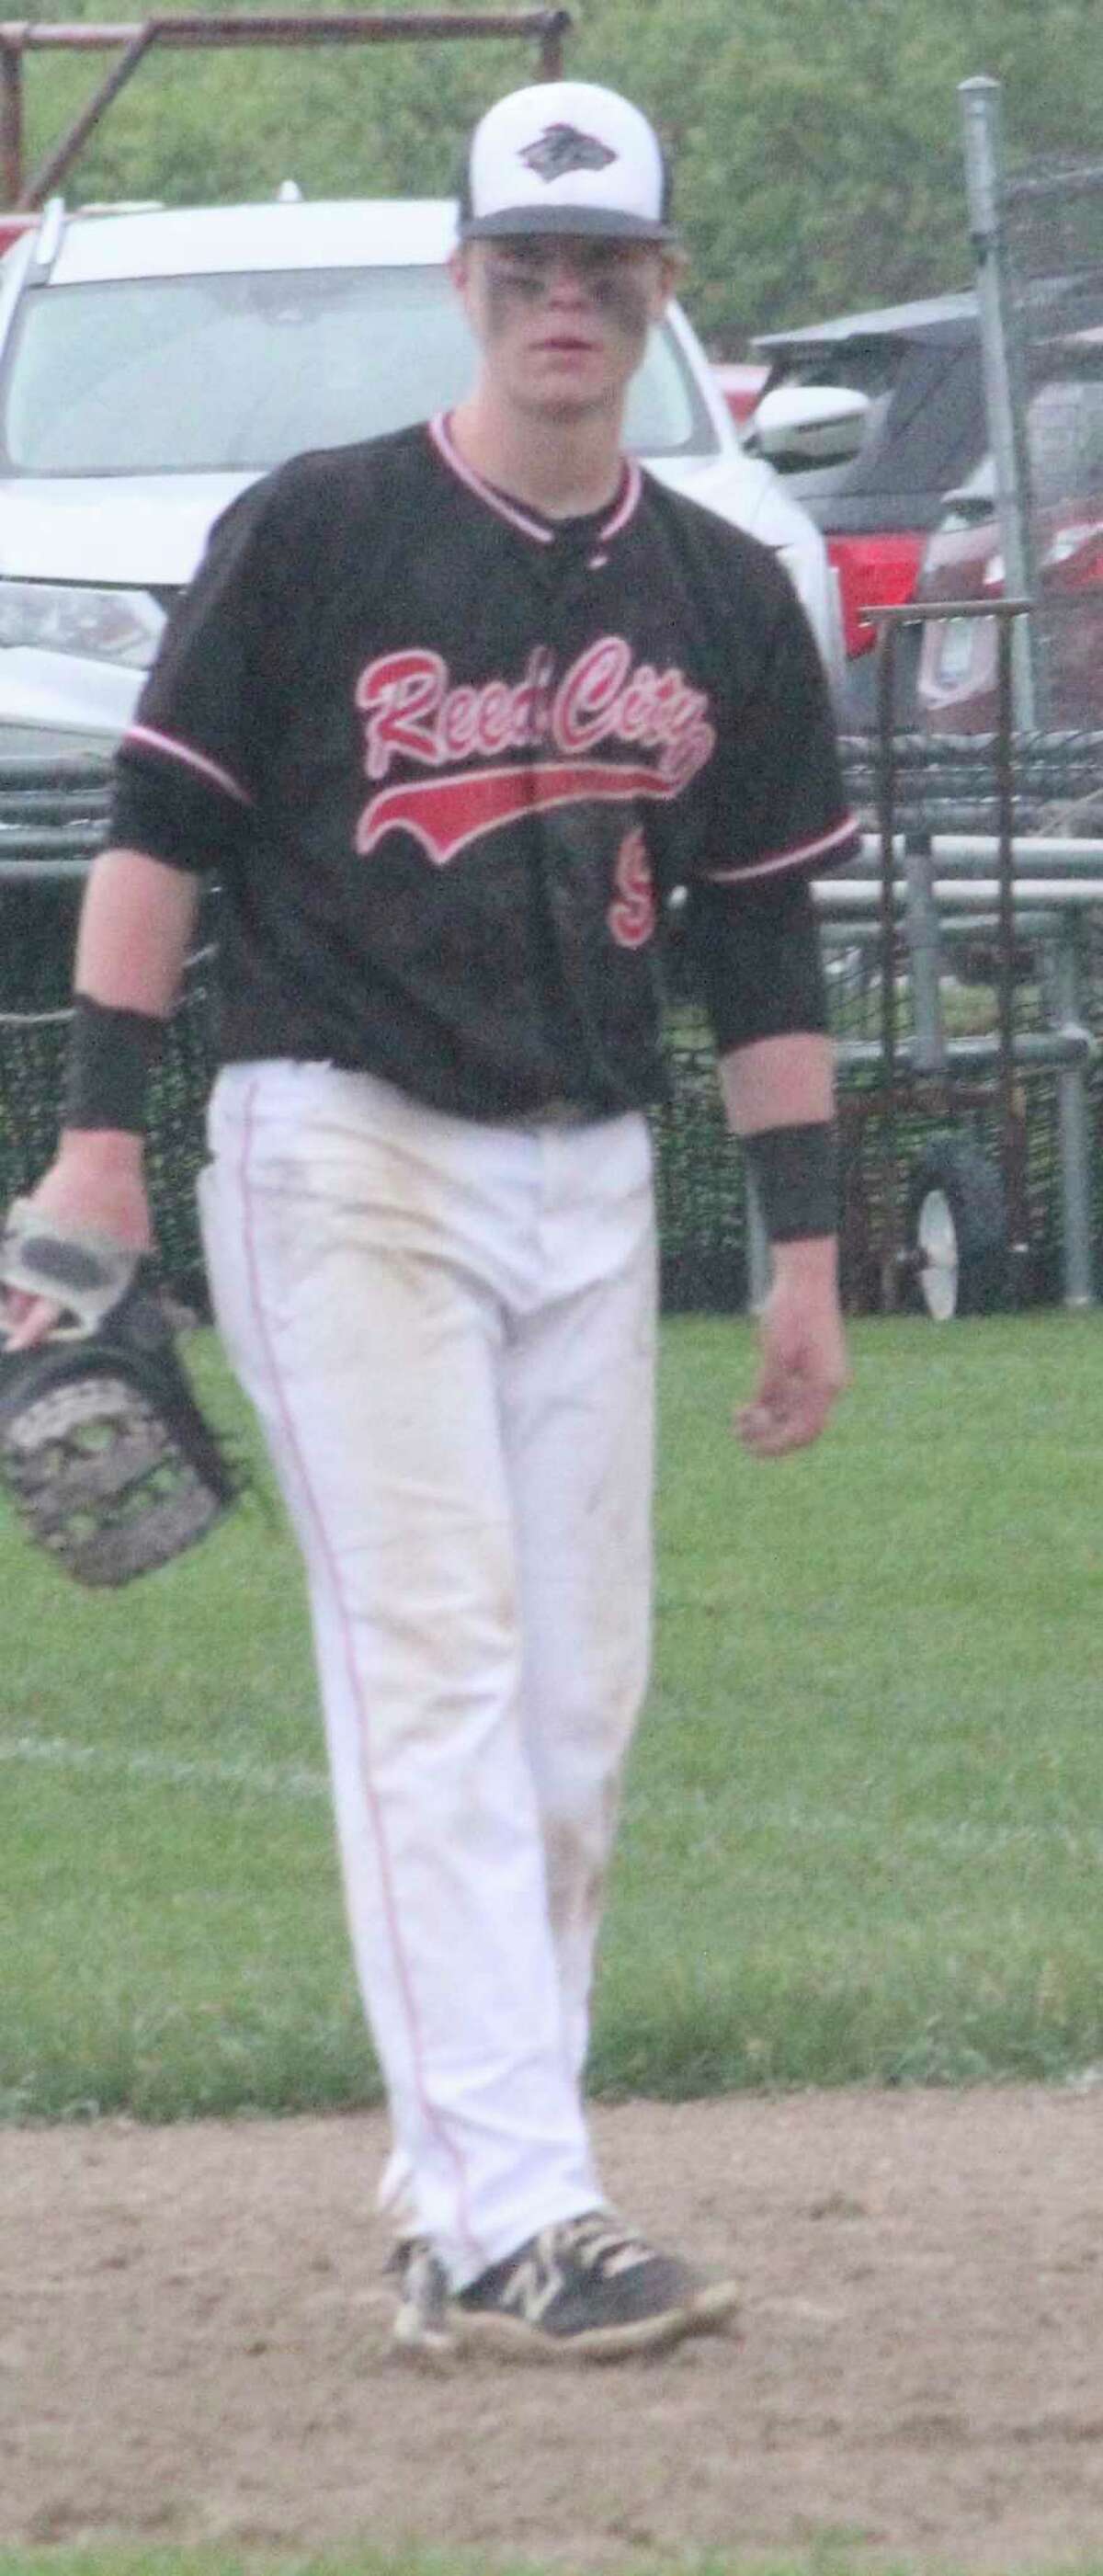 Reed CIty's Max Hammond focuses on the action at first base against Evart on Thursday. (Pioneer photo/John Raffel)